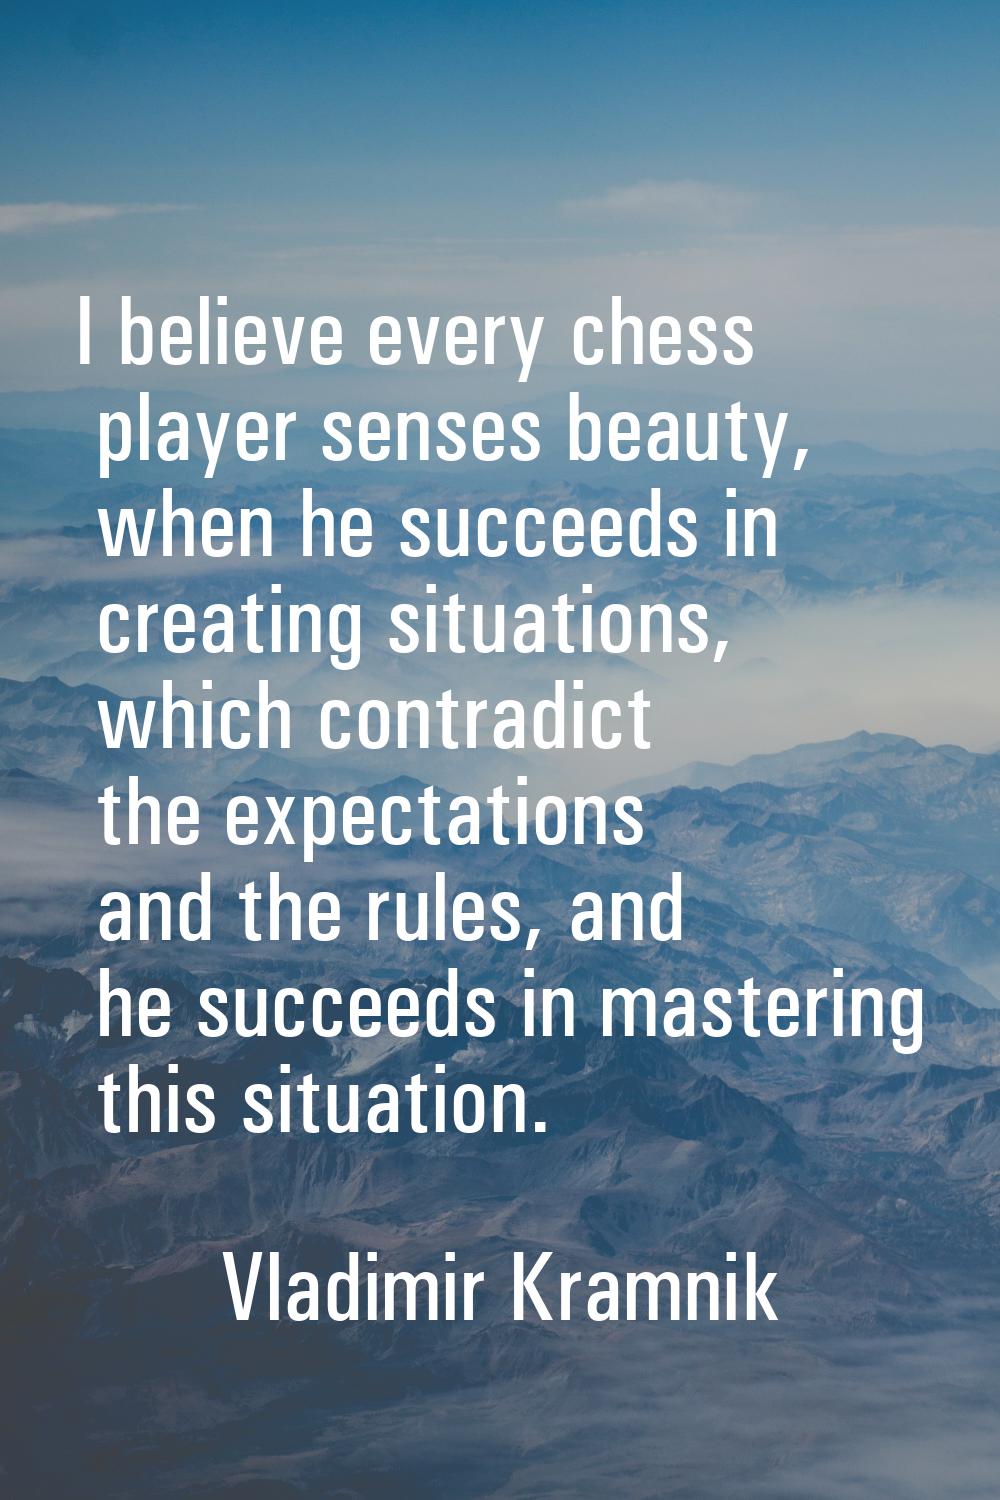 I believe every chess player senses beauty, when he succeeds in creating situations, which contradi